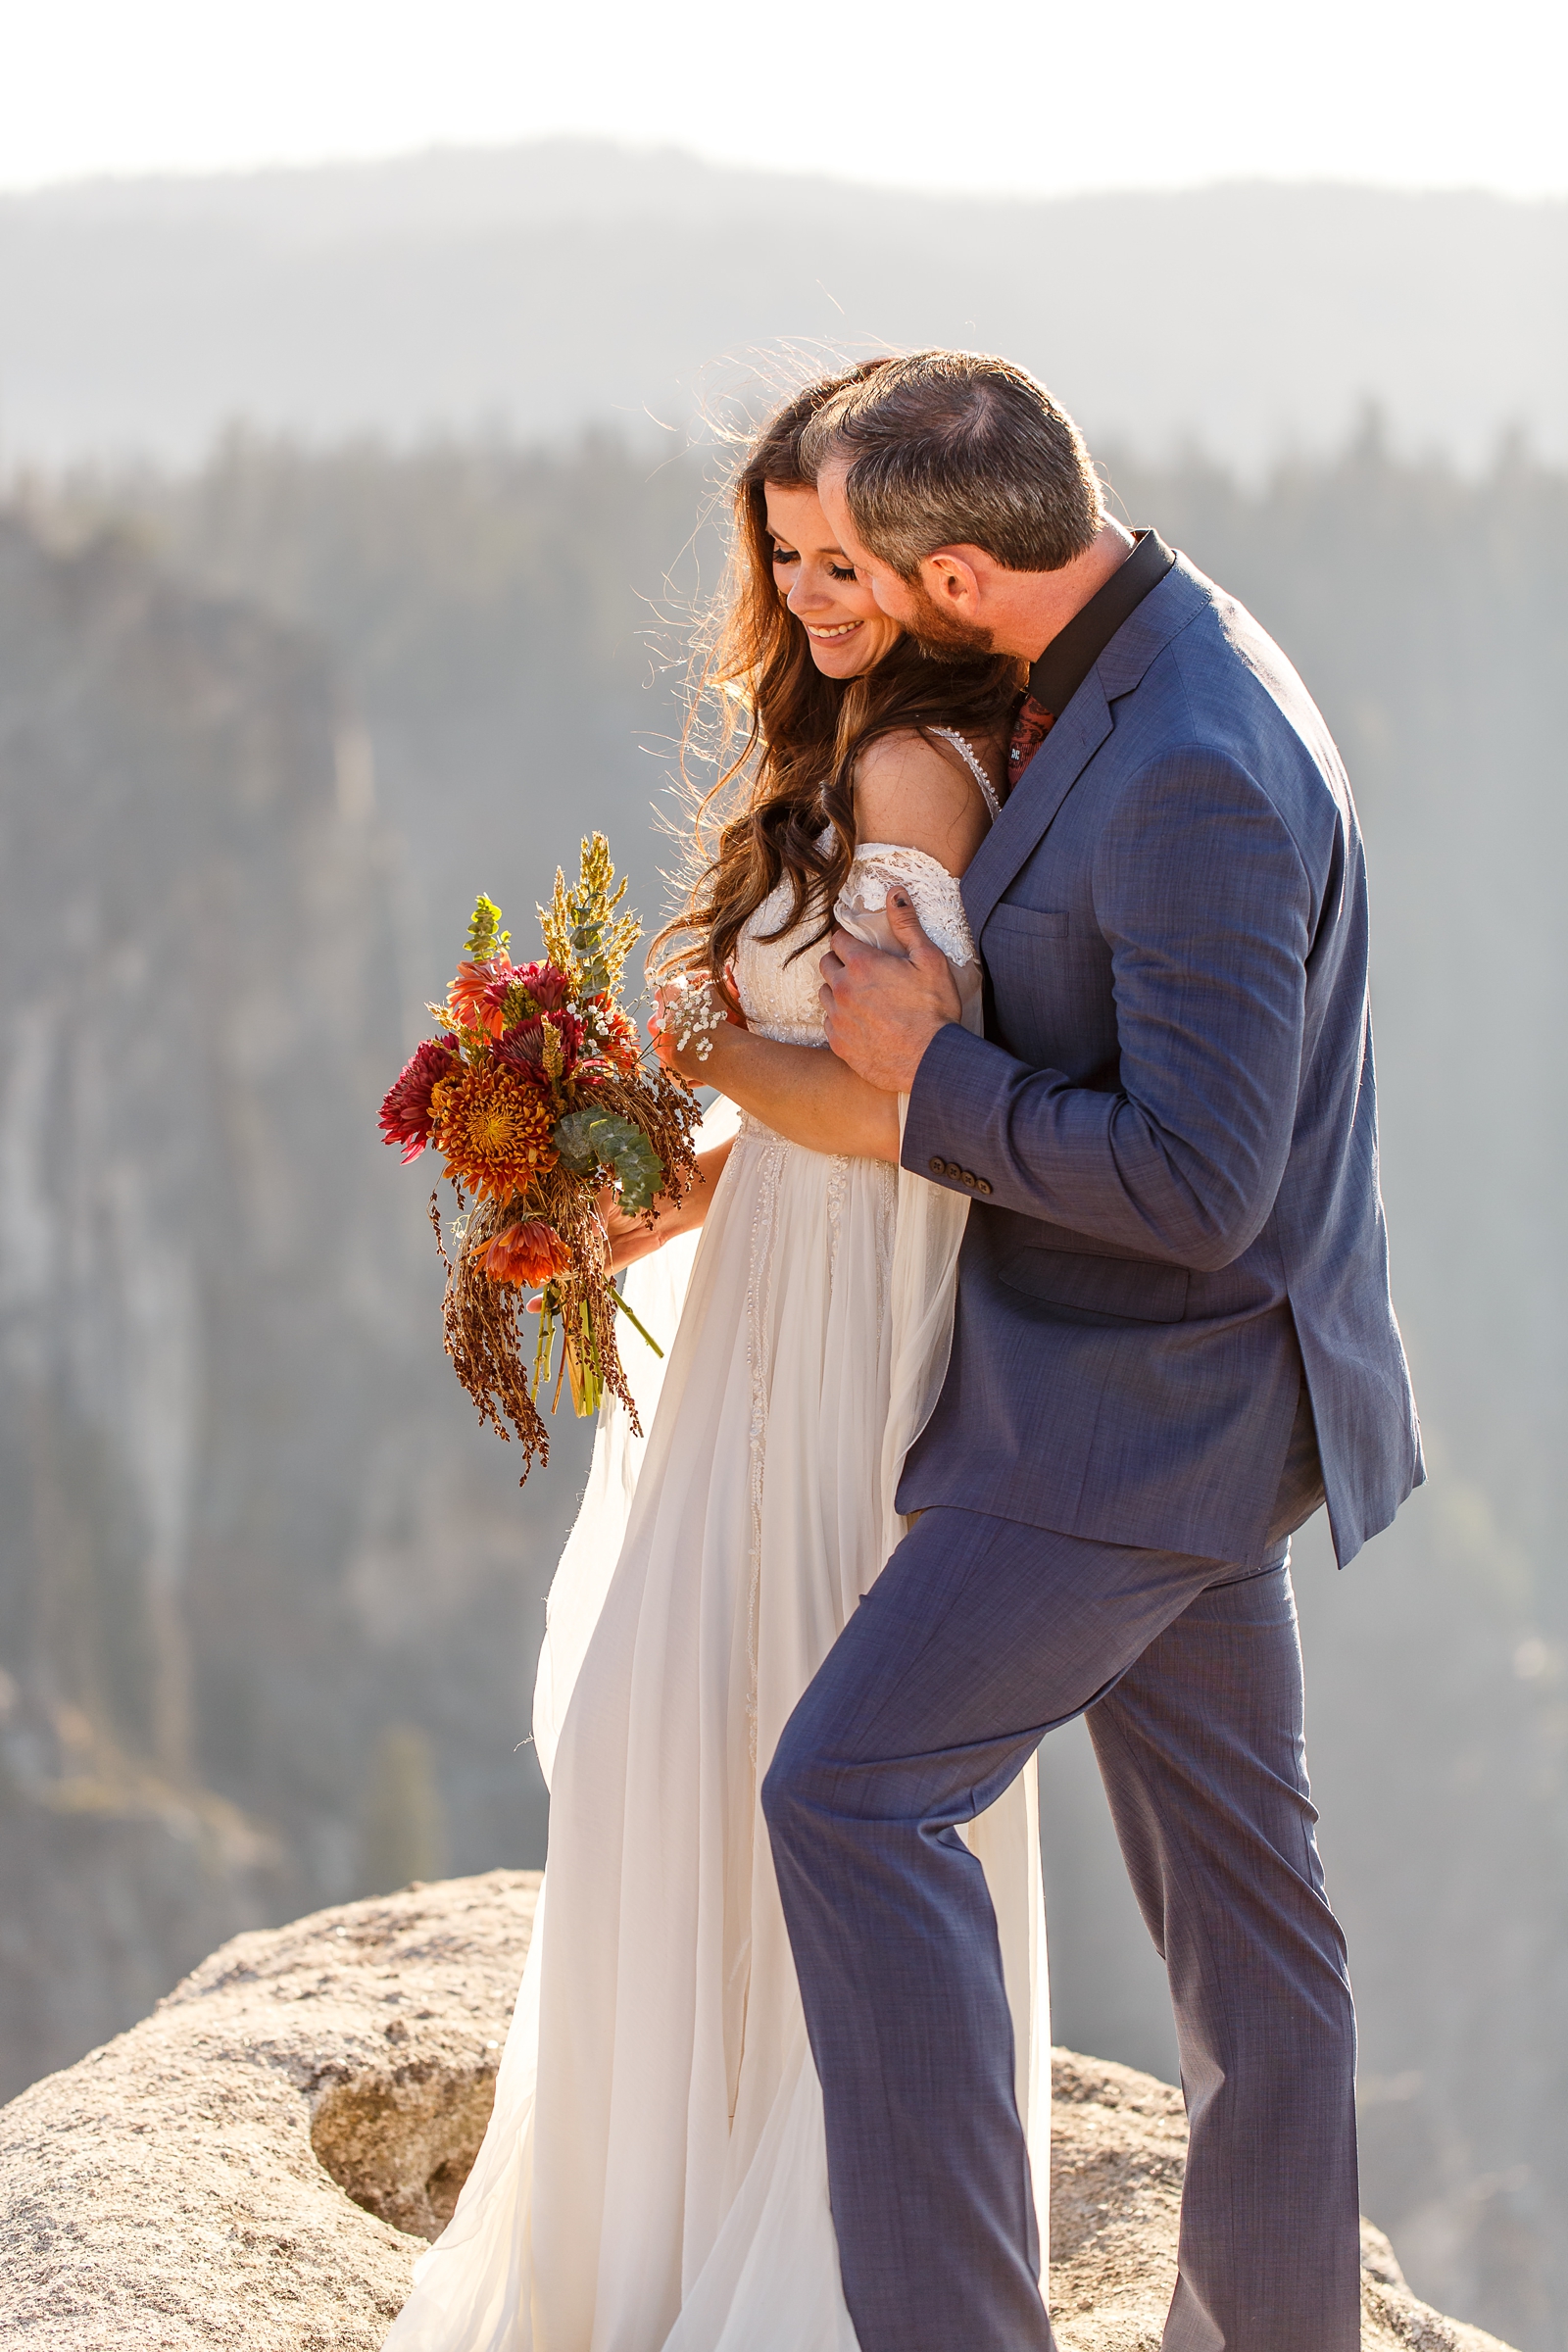 Bride and groom snuggling at their golden hour Yosemite elopement.